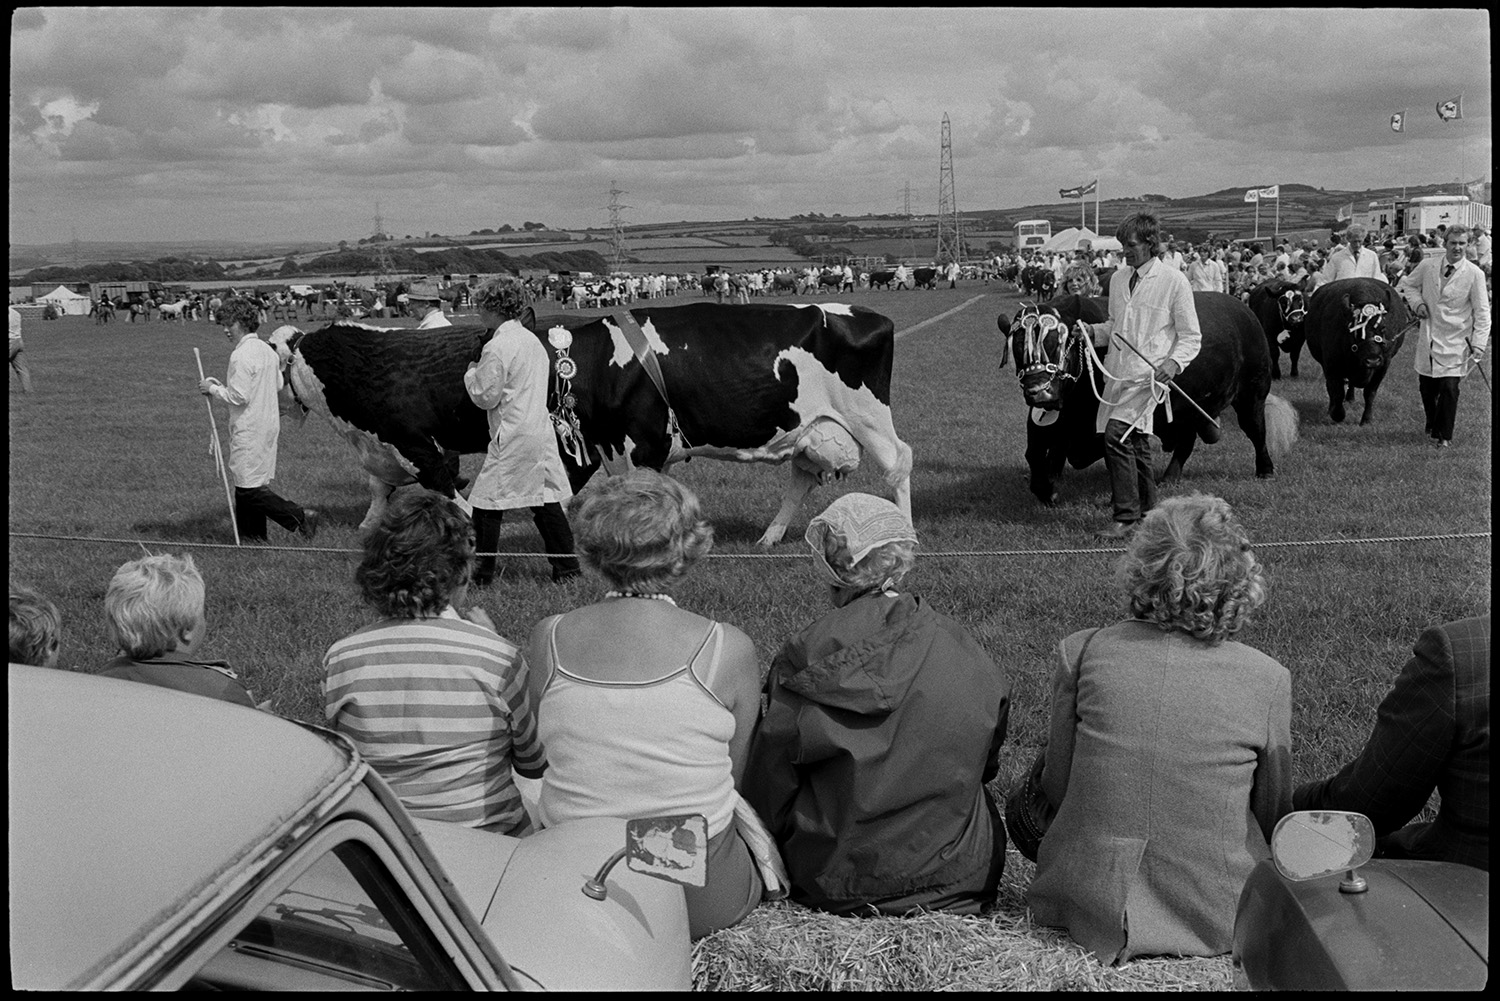 North Devon Show, Prize cattle, sheep, people having teas, woman, mother and baby.
[Visitors sat on hay bales by cars watching a parade of prize winning cattle in the show ring at the North Devon Show near Alverdiscott. A landscape with visitors, marquees and electric pylons is visible in the background.]